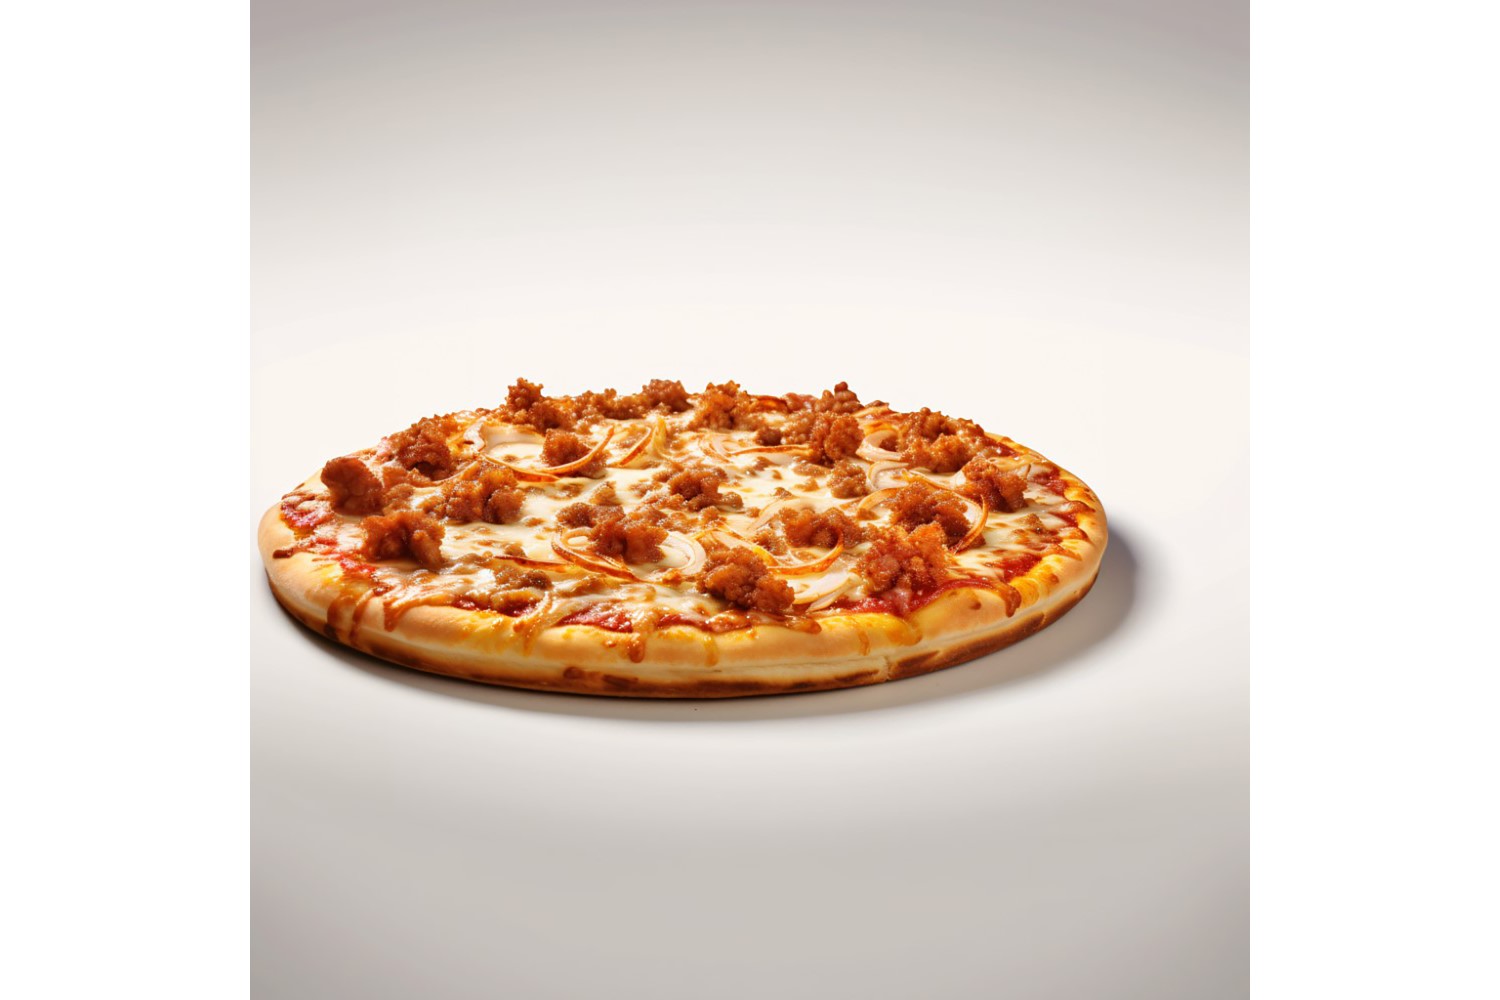 Meat Pizza On white background 30